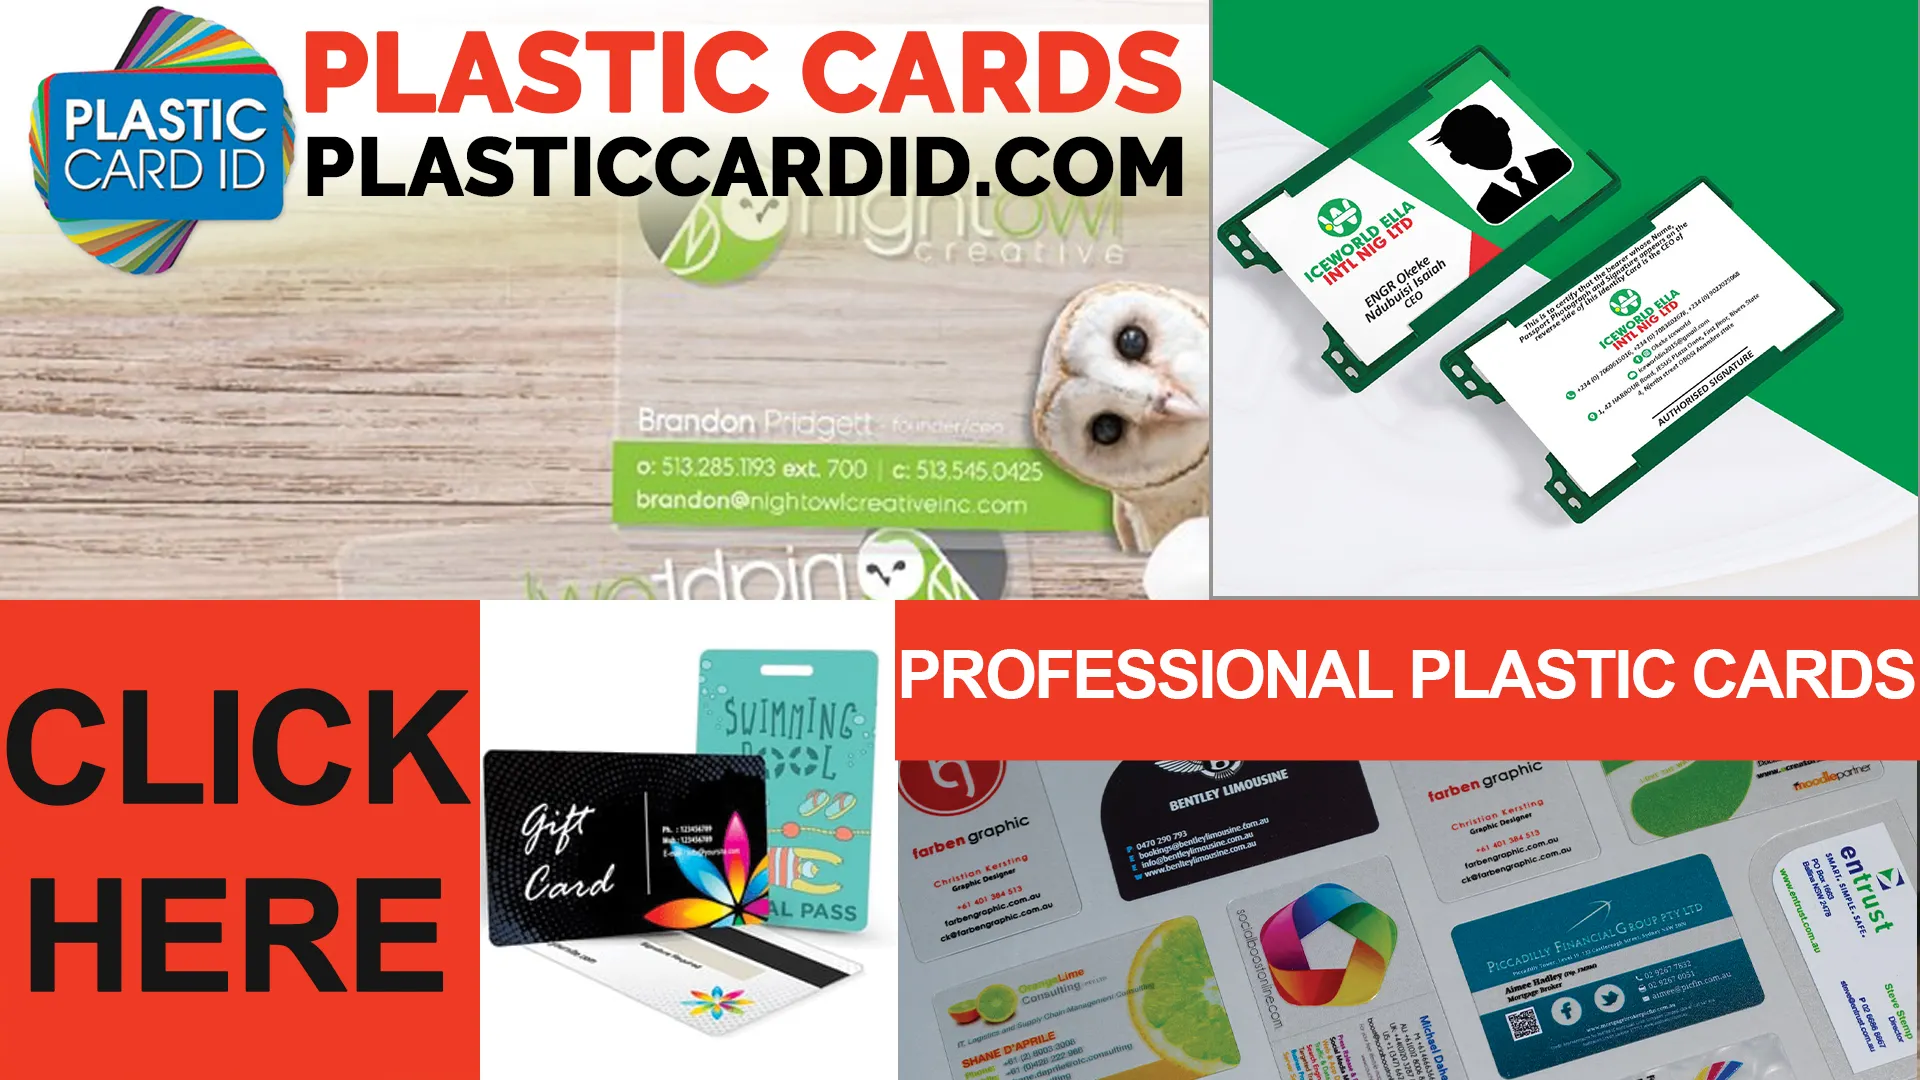  Cutting-Edge Card Printers and Supplies at Plastic Card ID




 